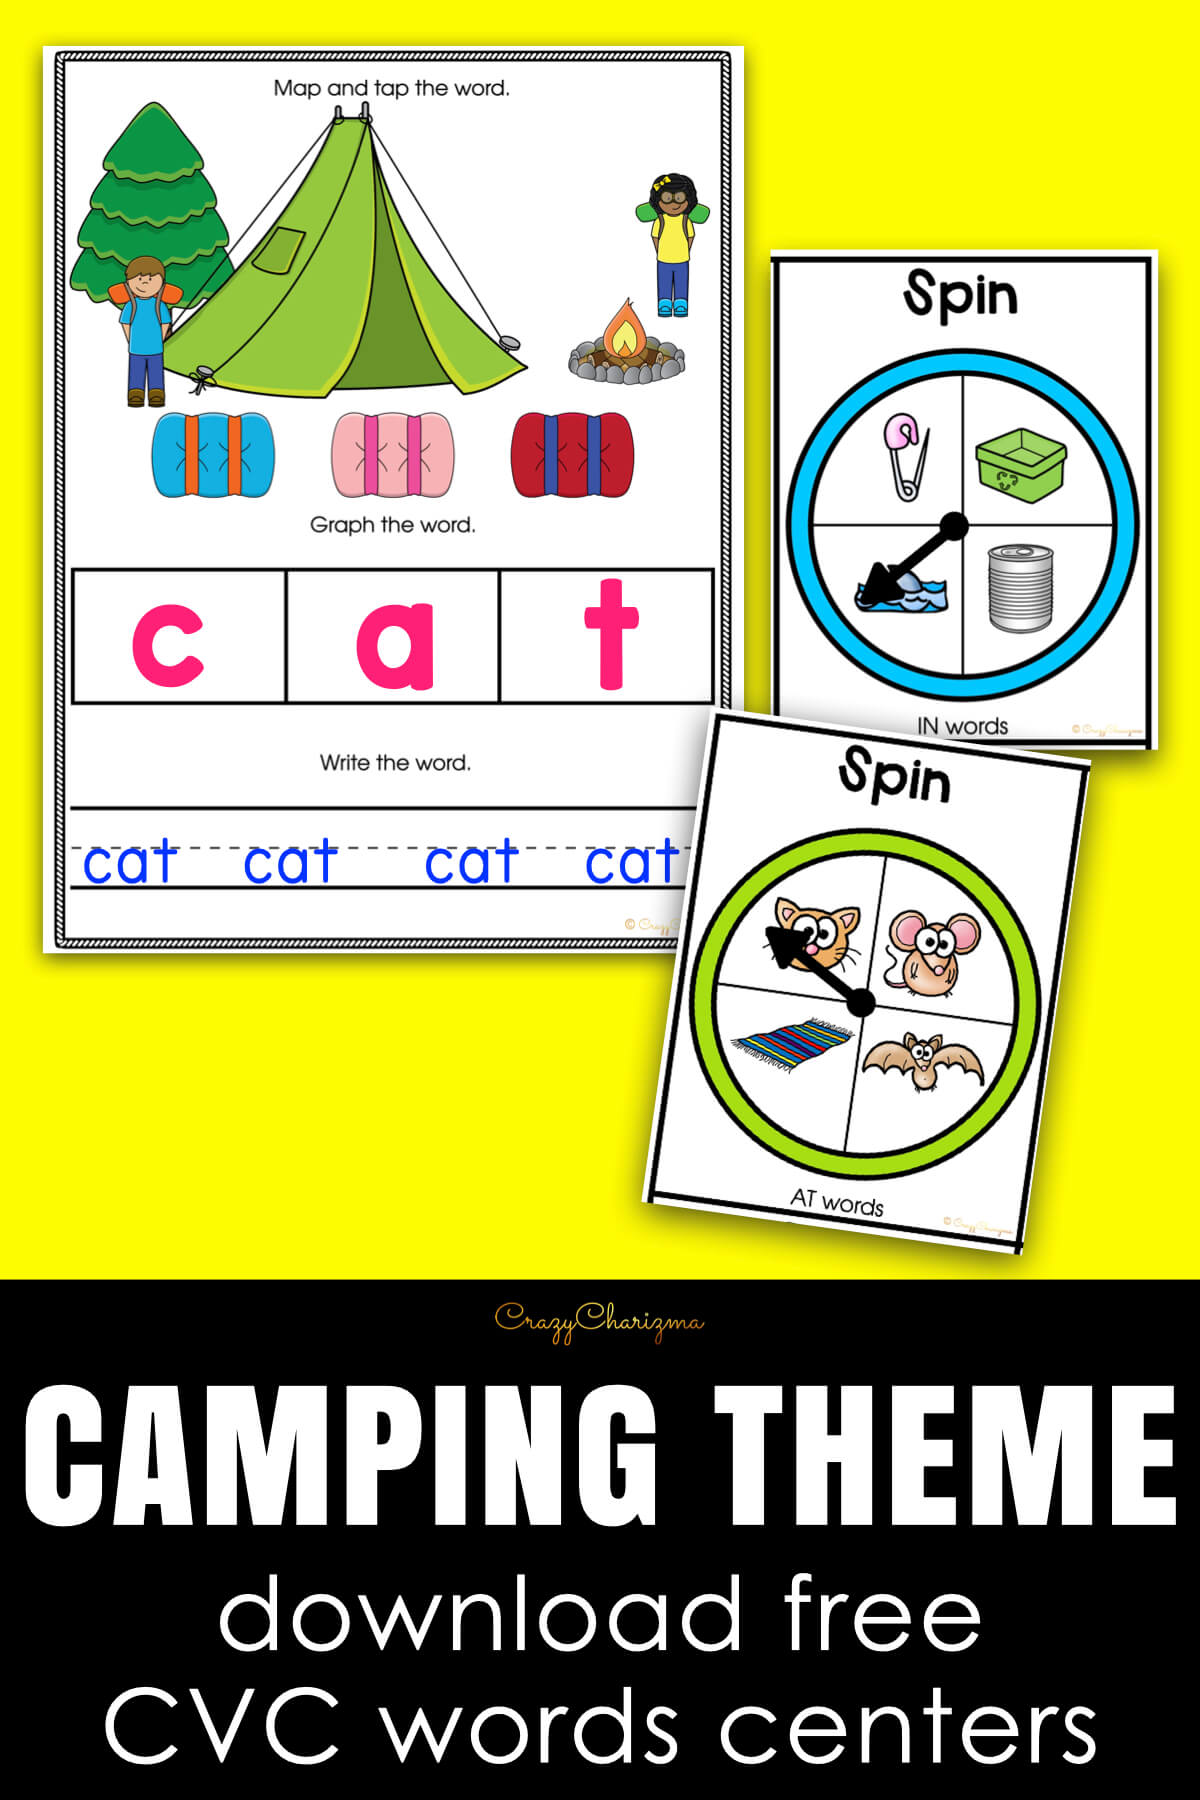 Ignite the imagination of young learners with free CVC words centers, designed to infuse camping activities with excitement and learning! Kids will map out CVC words with fun camping-themed mats.